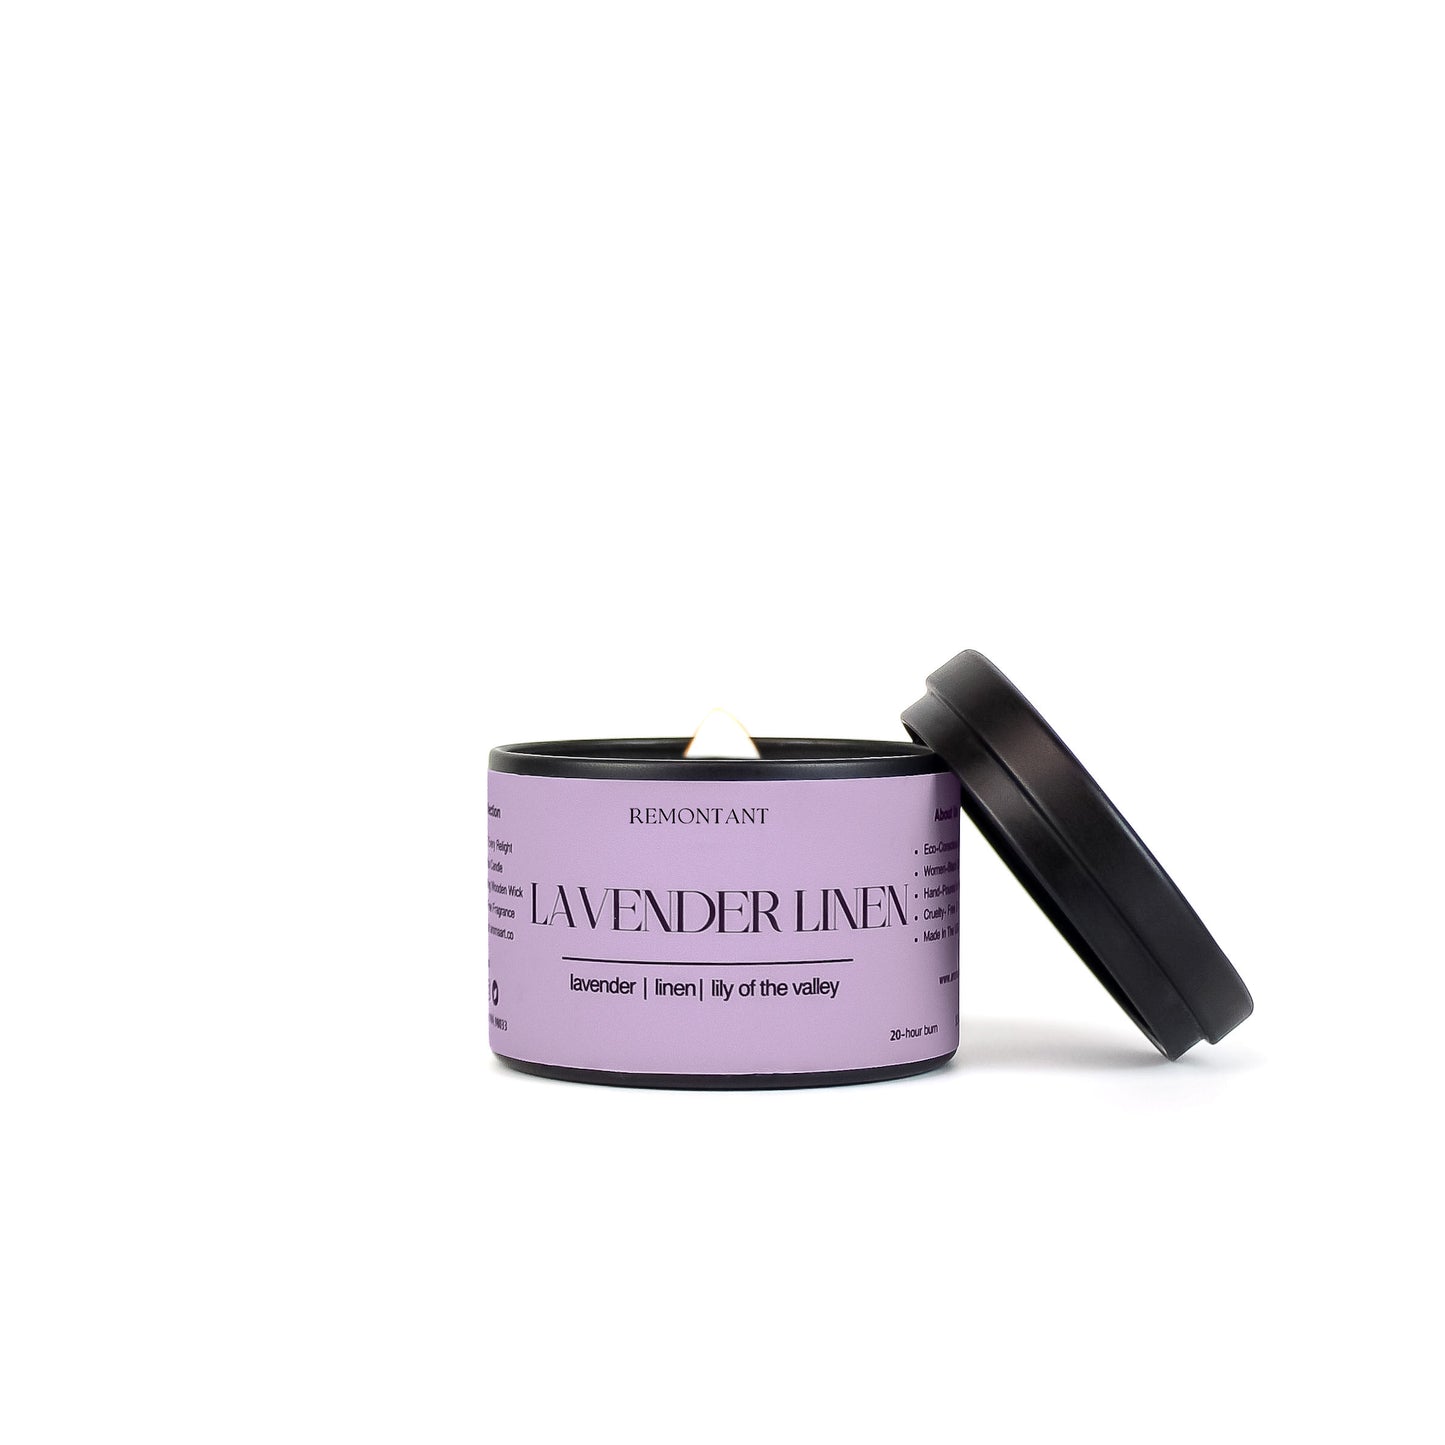 Lavender Linen Travel Sized Candle Tin